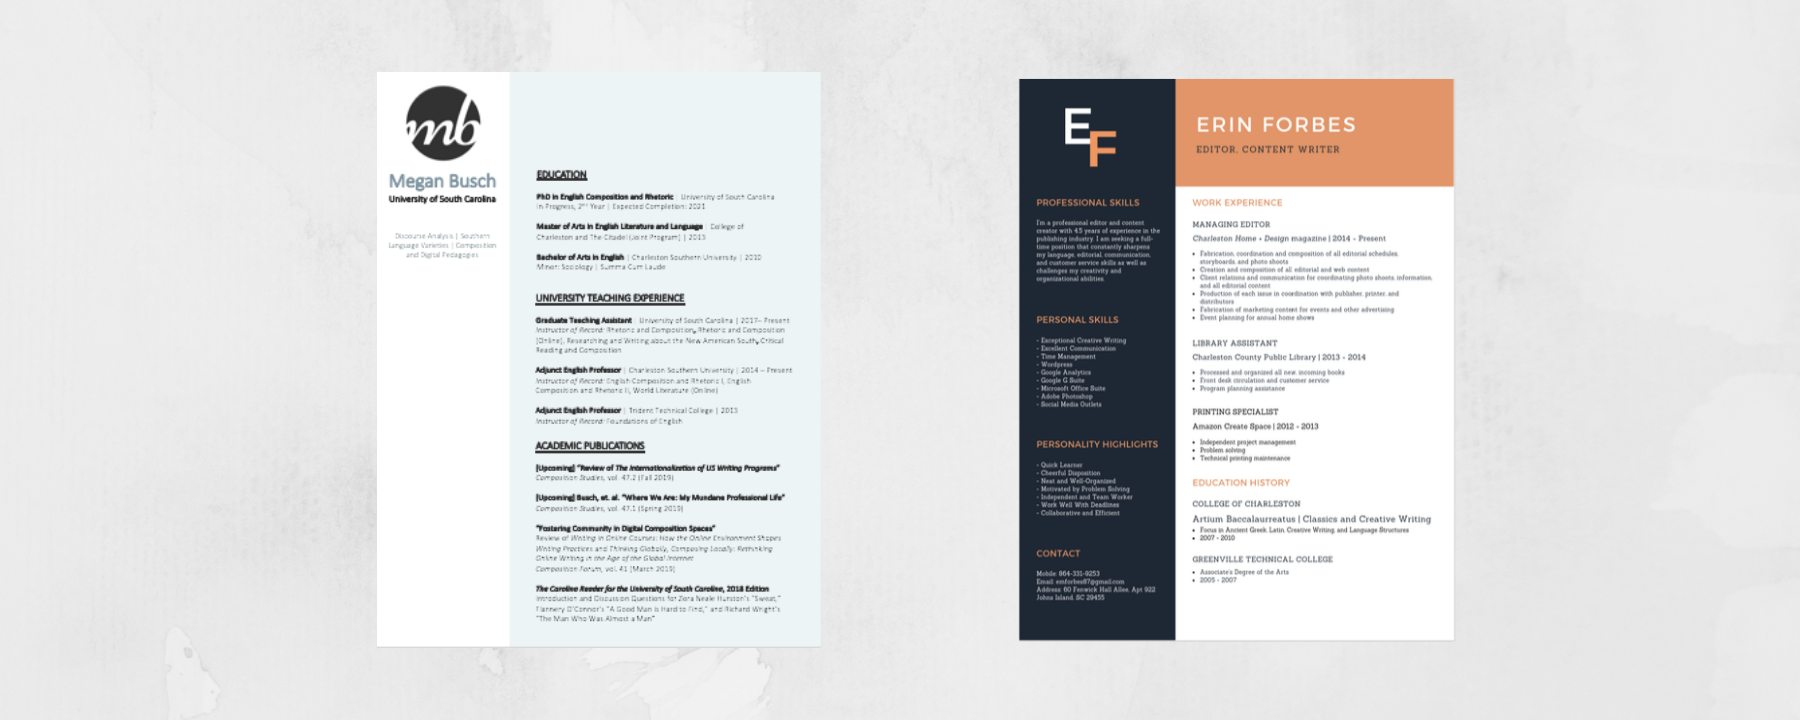 CV and resume created with powerpoint and canva.